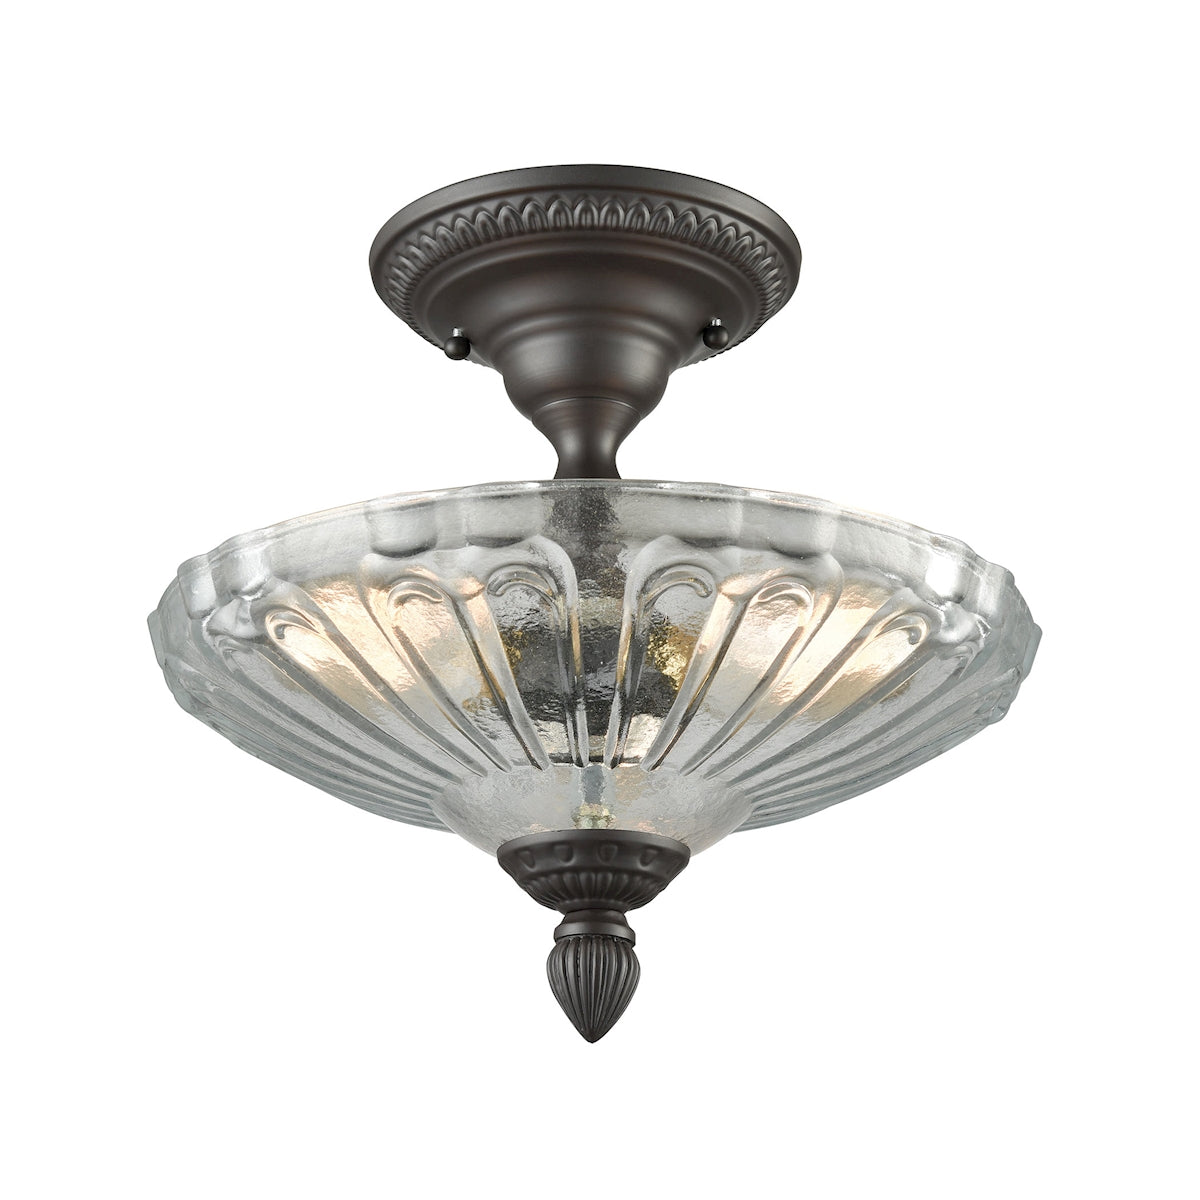 ELK Lighting 66392-3 Restoration 3-Light Semi Flush in Oil Rubbed Bronze with Clear and Frosted Glass